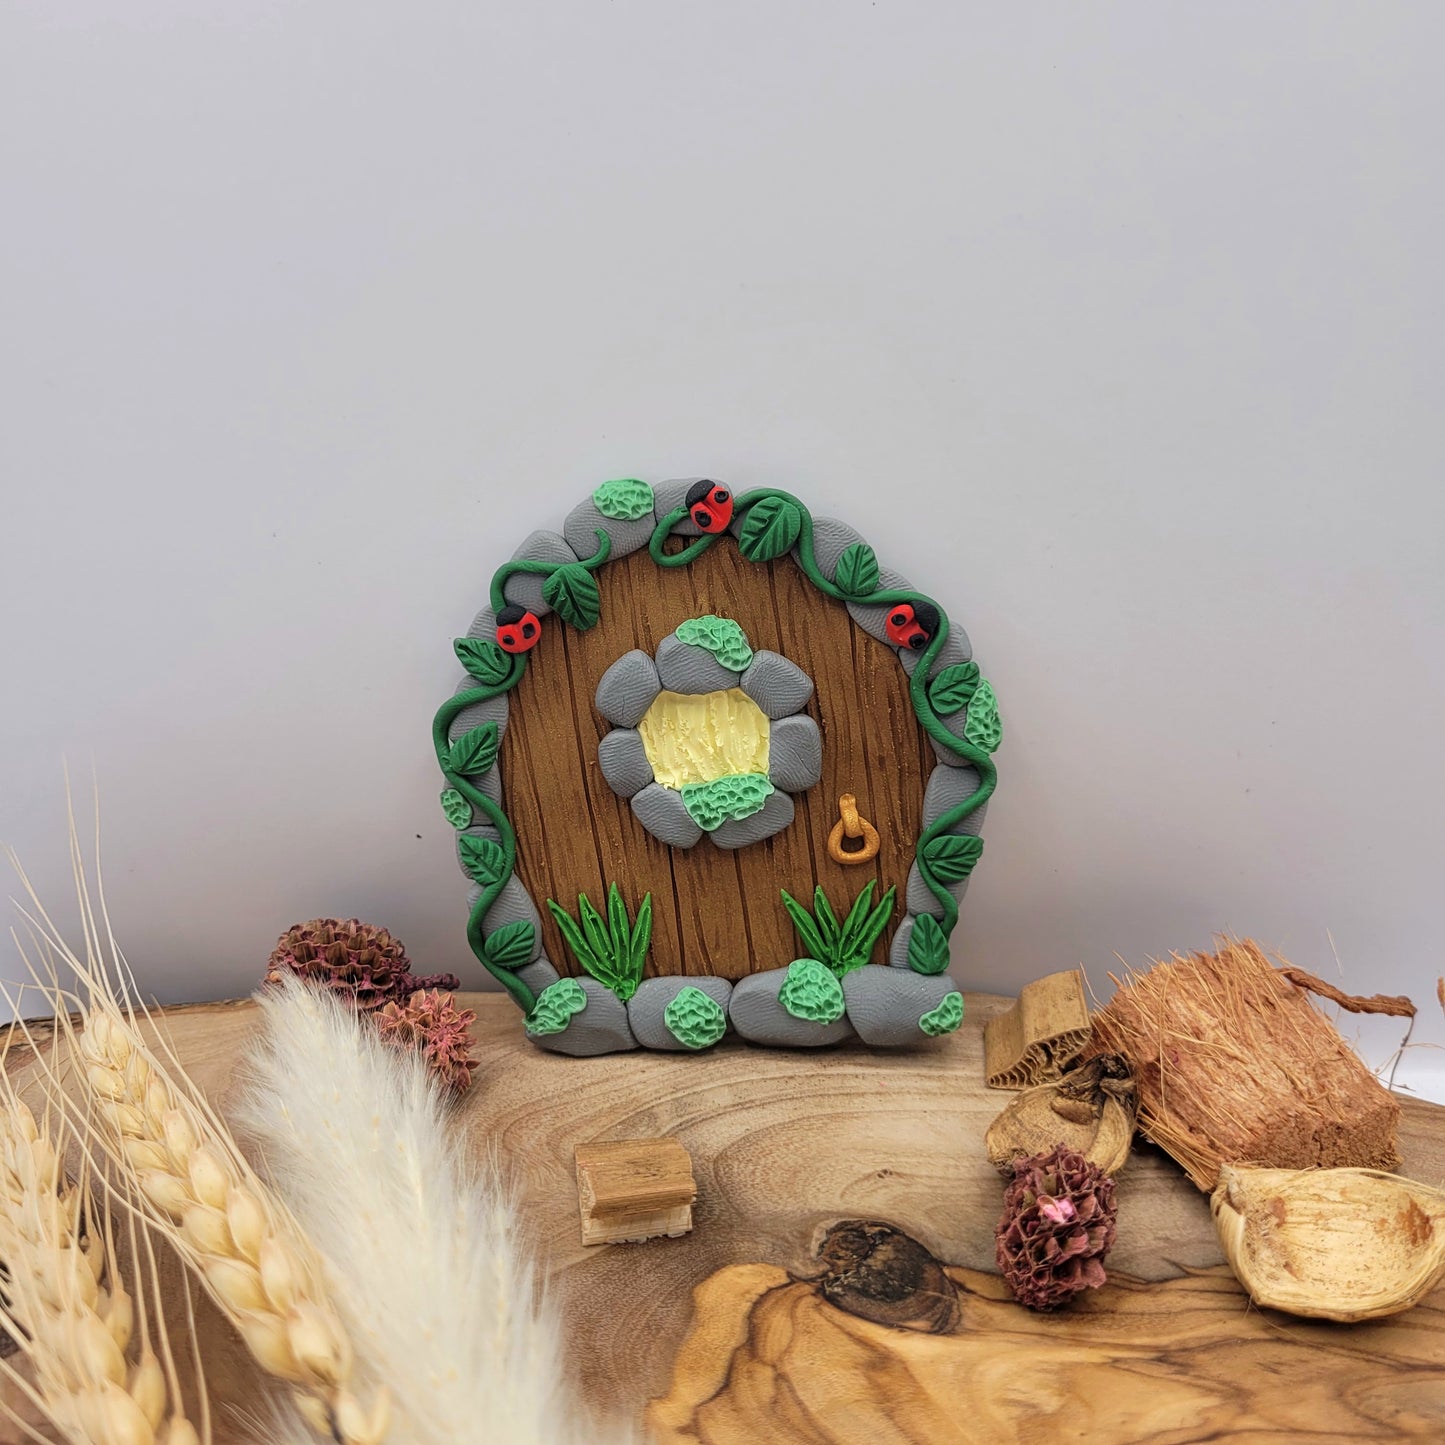 The ladybug fairy door sits on an oak wood platform surrounded by preserved wood pieces and willows. The mini ladybug door is brown wood patterned with grey cobblestone finish, a window and a door knob. It is detailed with green grass, moss, vines and, of course, ladybugs!